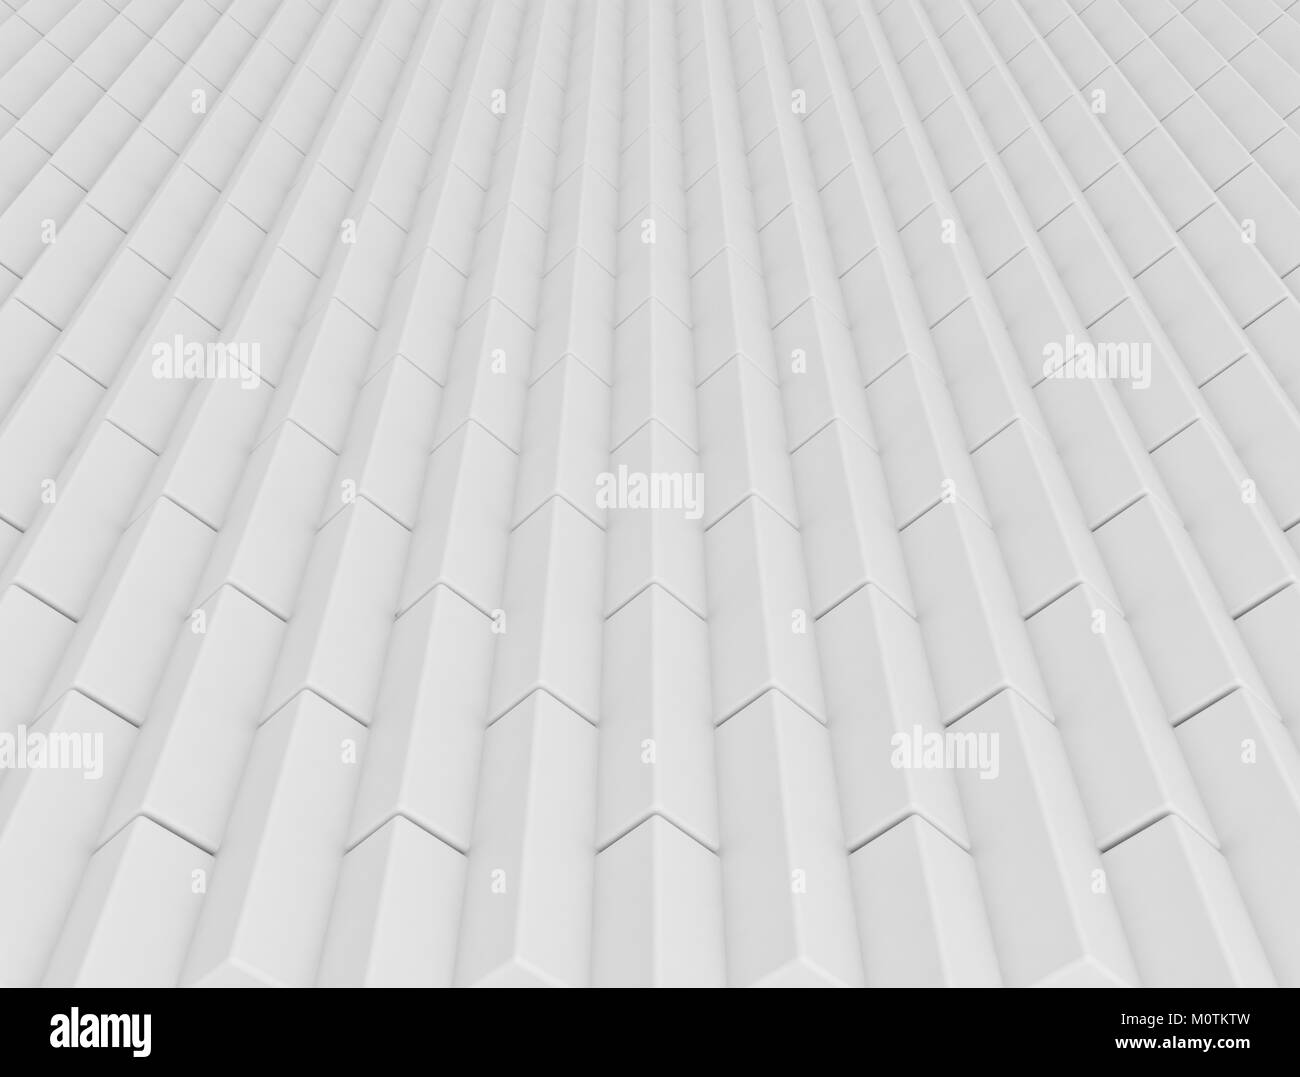 Abstract background with 3d linear blocks Stock Photo